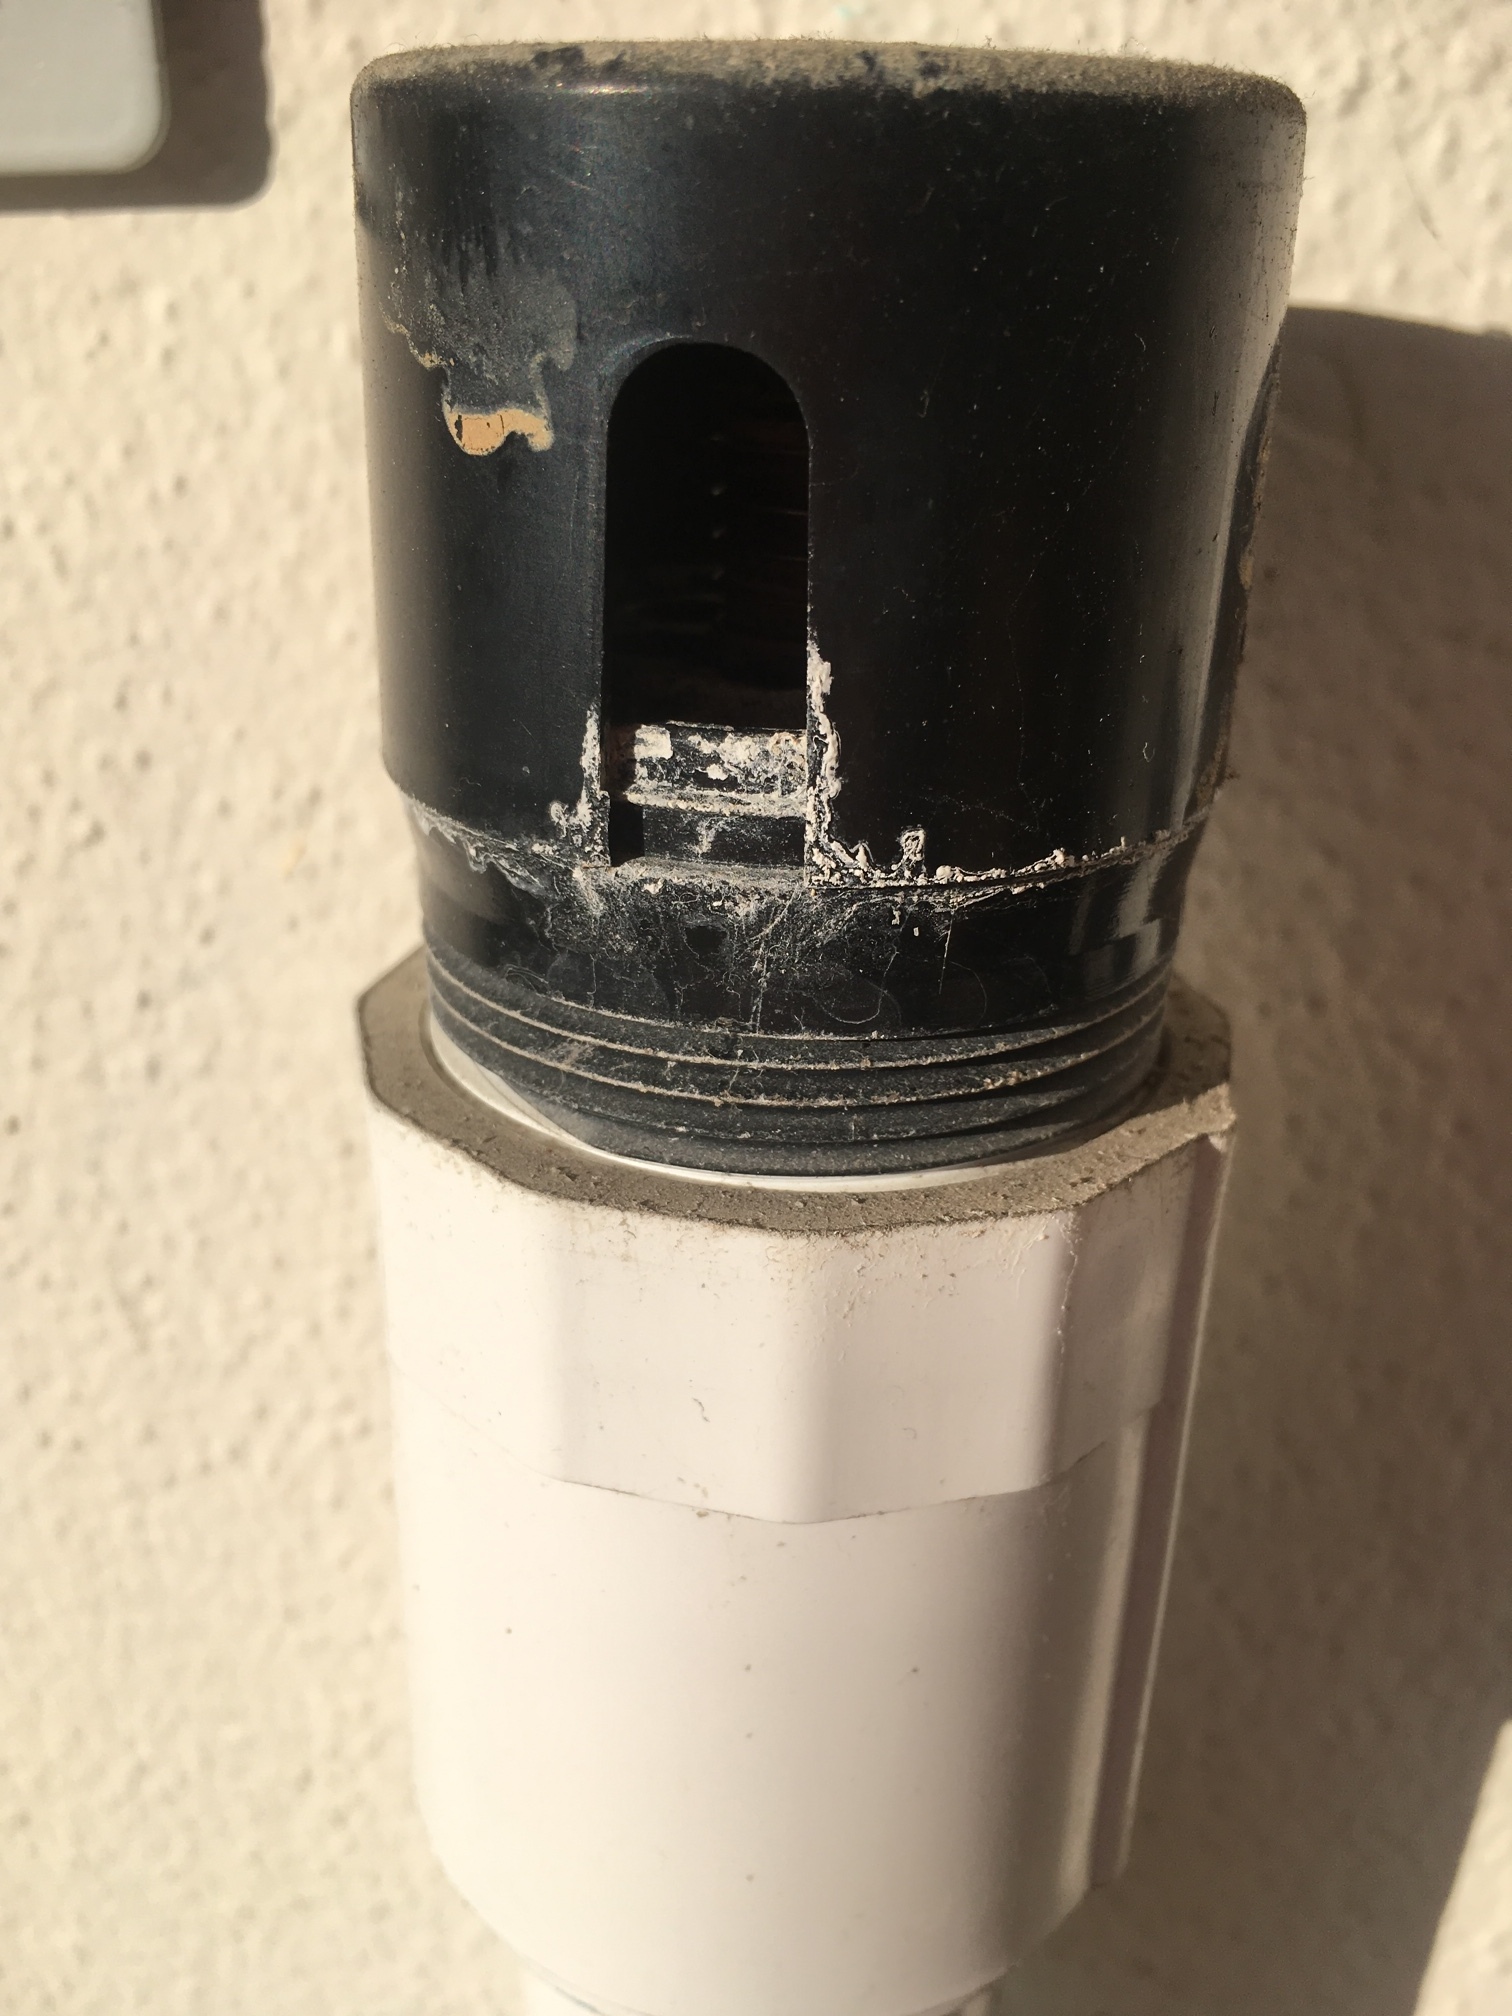 This vent recently failed. &nbsp;Easy to replace by unscrewing it and screwing a new one back in place.